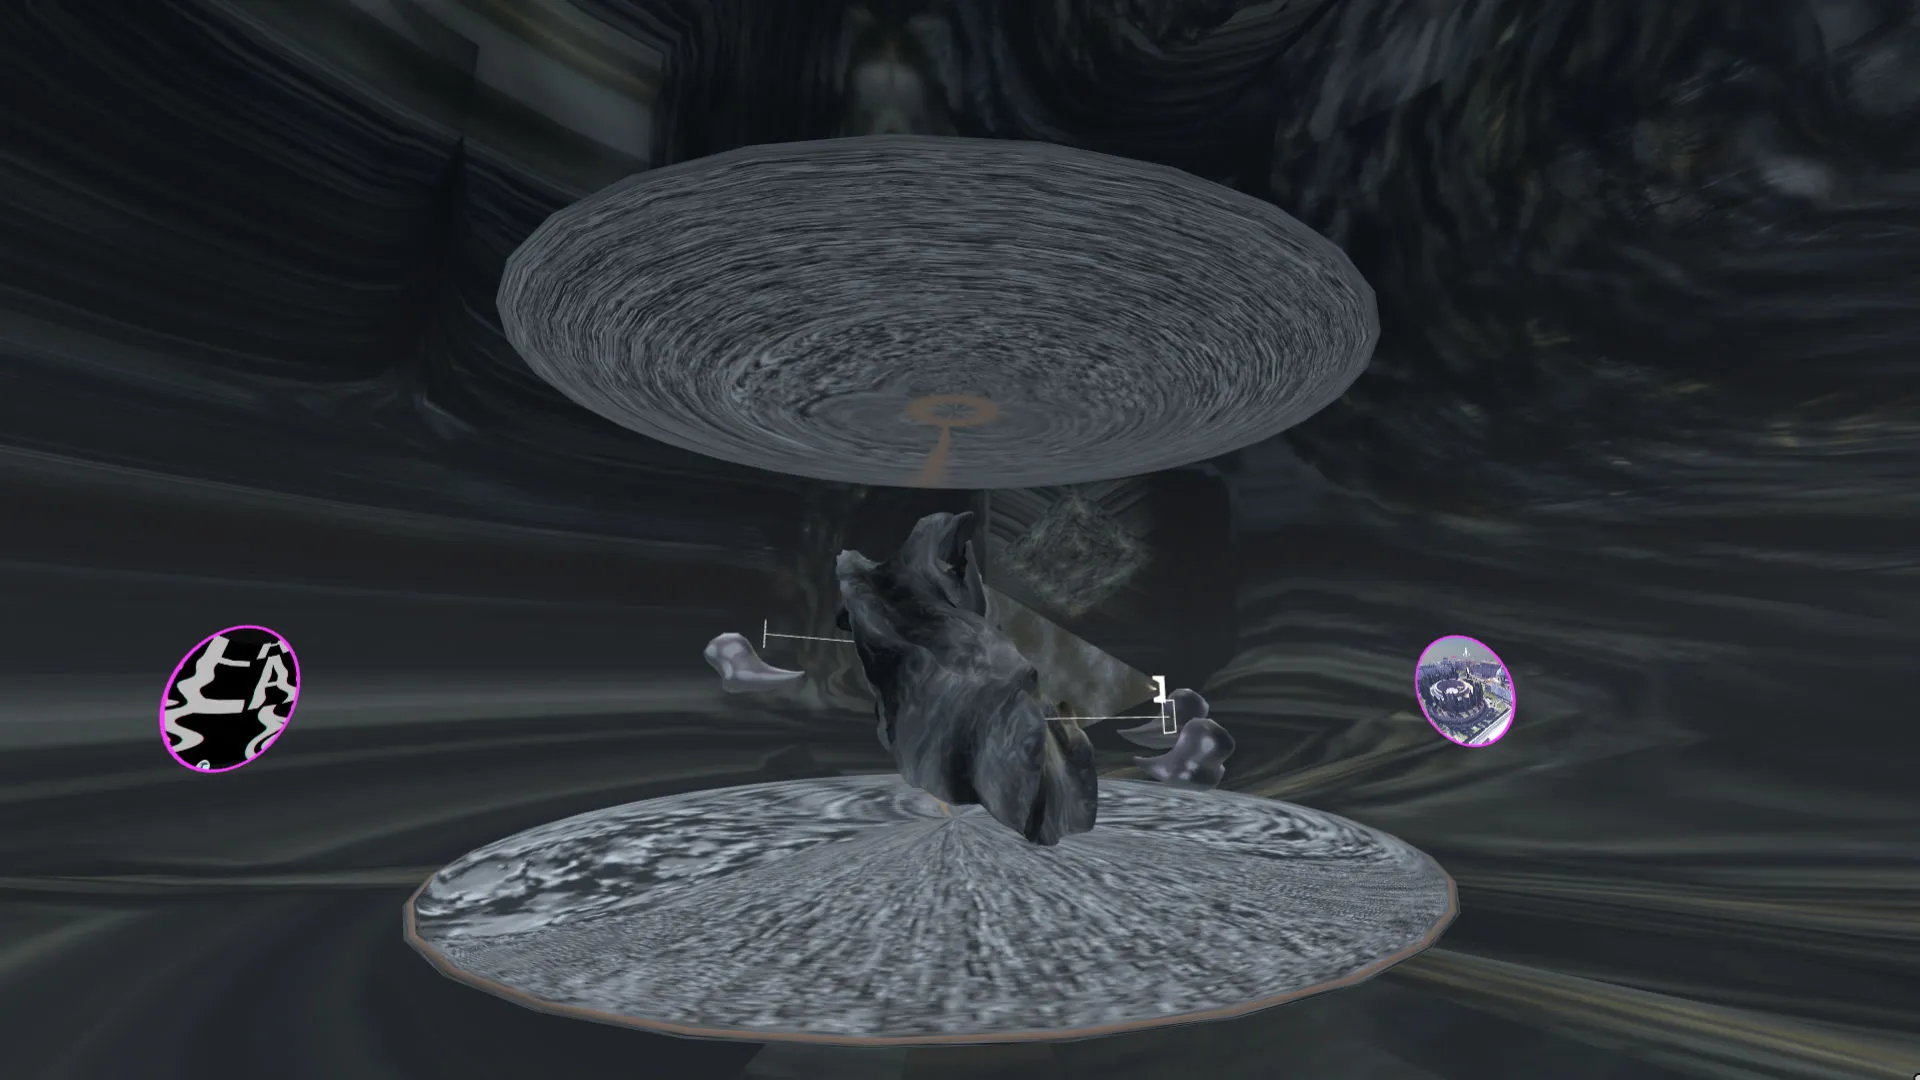 A still image of a mass-like entity with a portal to the XRHub scene in the background